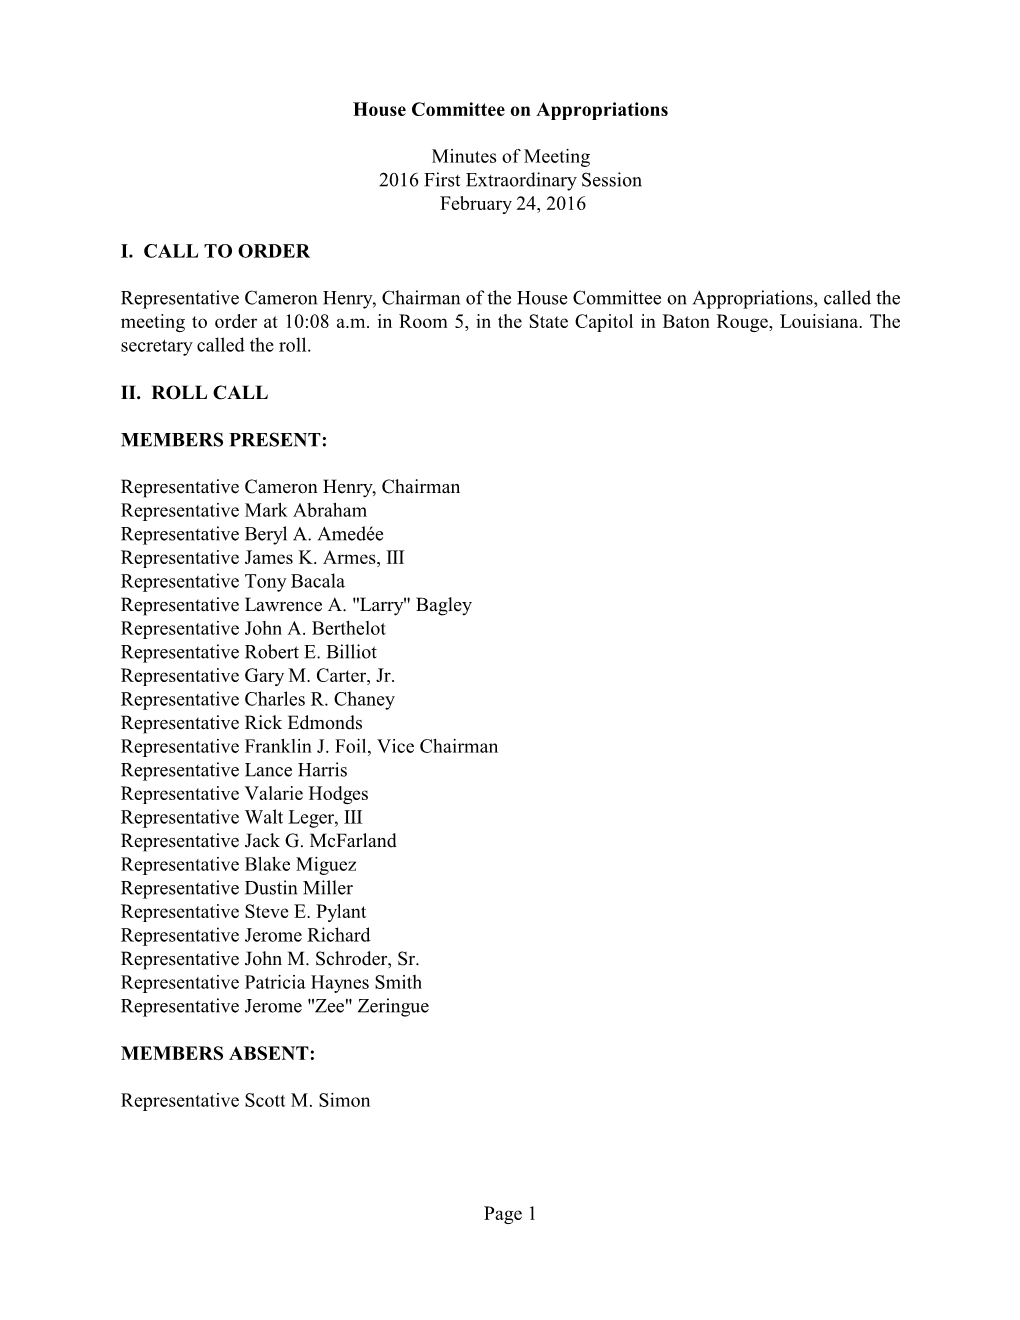 House Committee on Appropriations Minutes of Meeting 2016 First